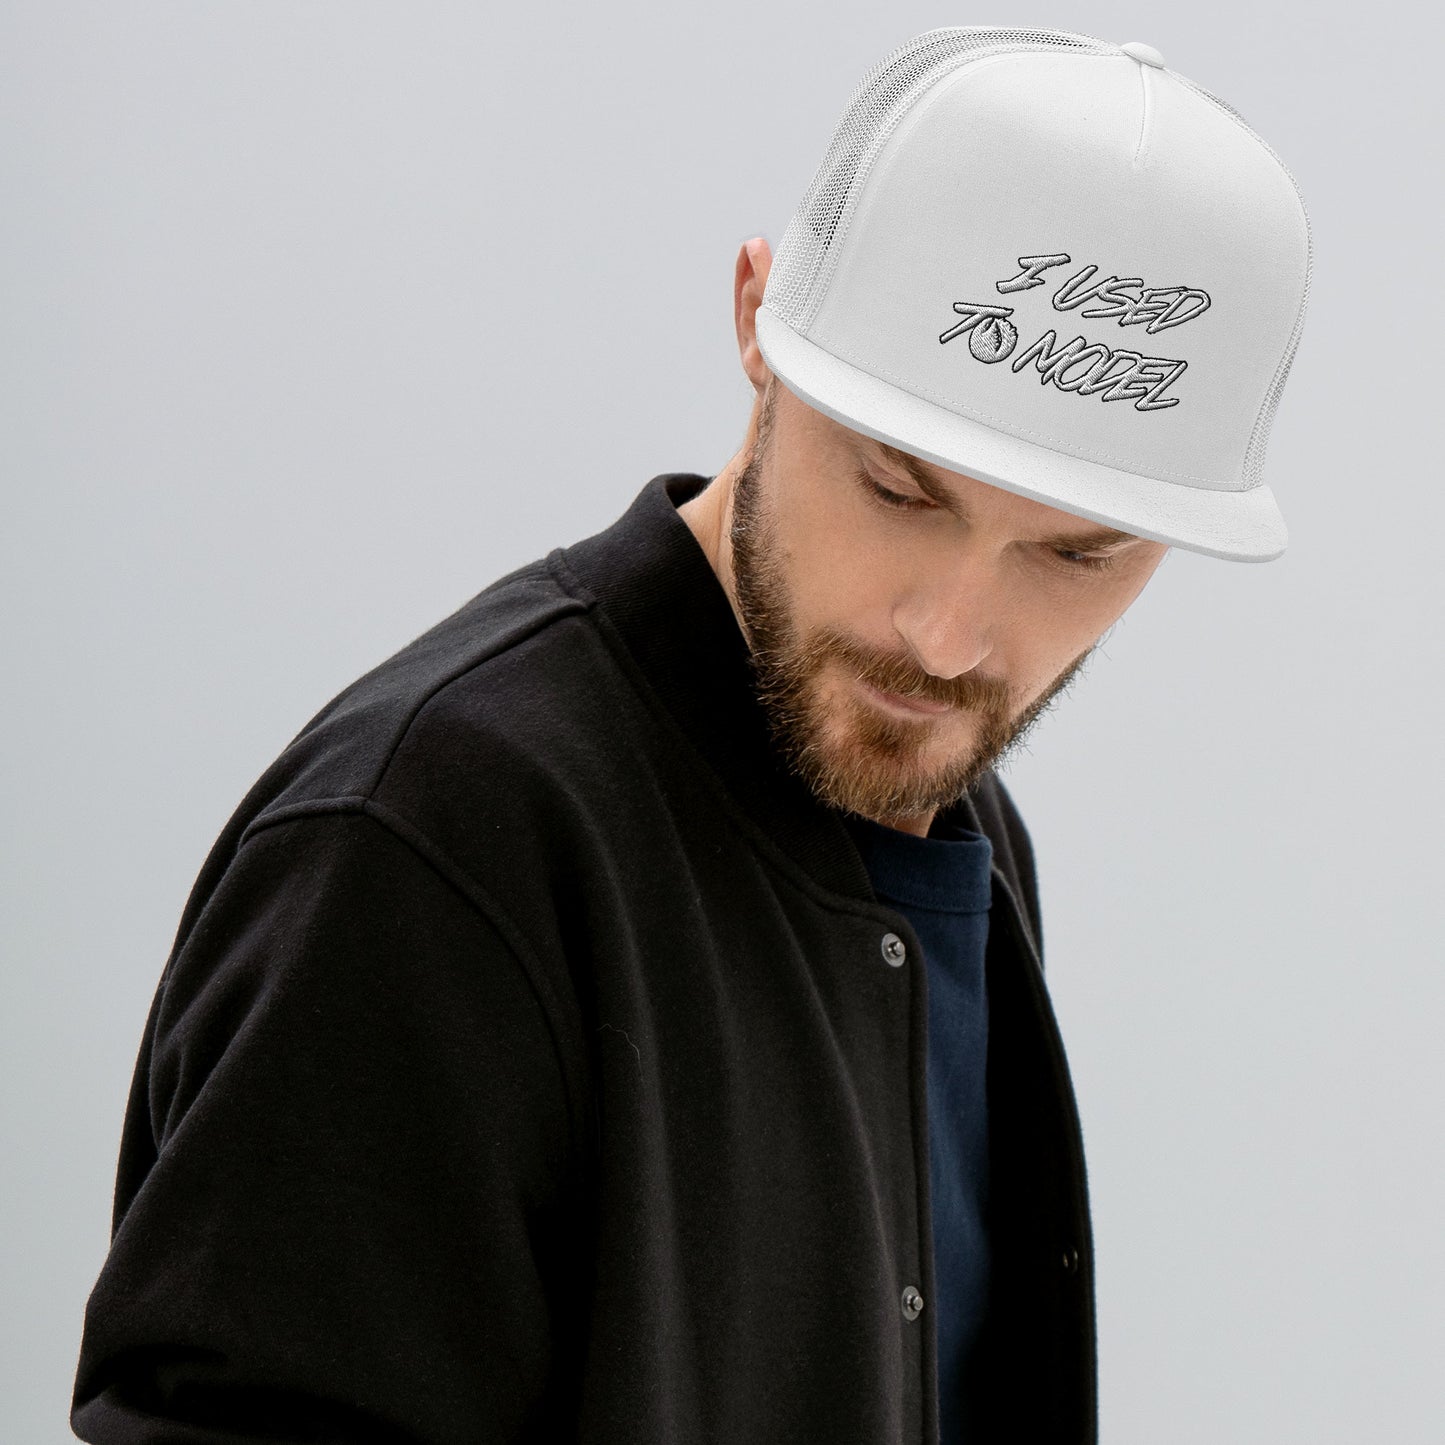 I Used To Model - Embroidered Trucker Cap